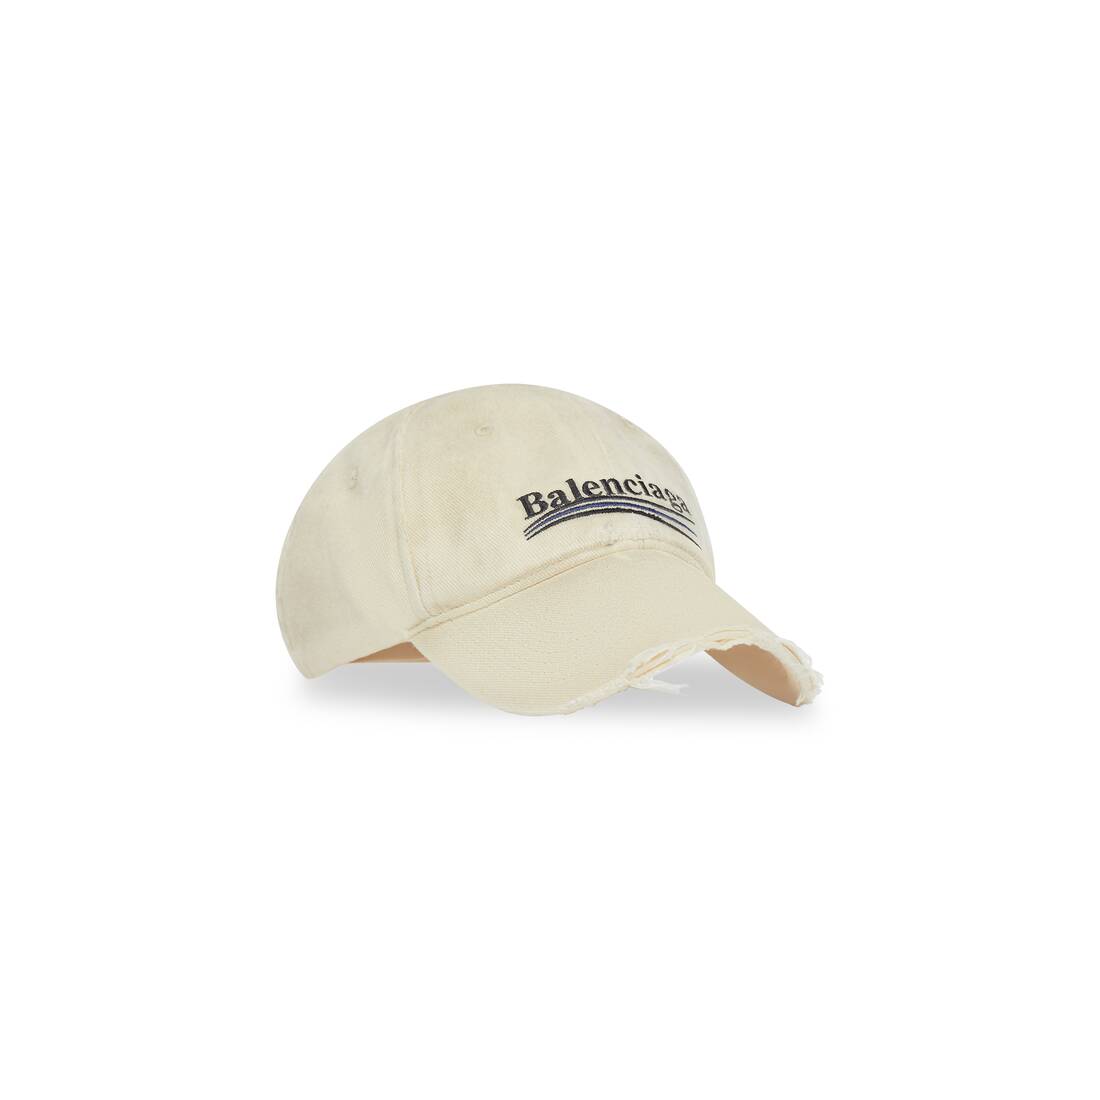 Women's Political Campaign Destroyed Cap in Beige